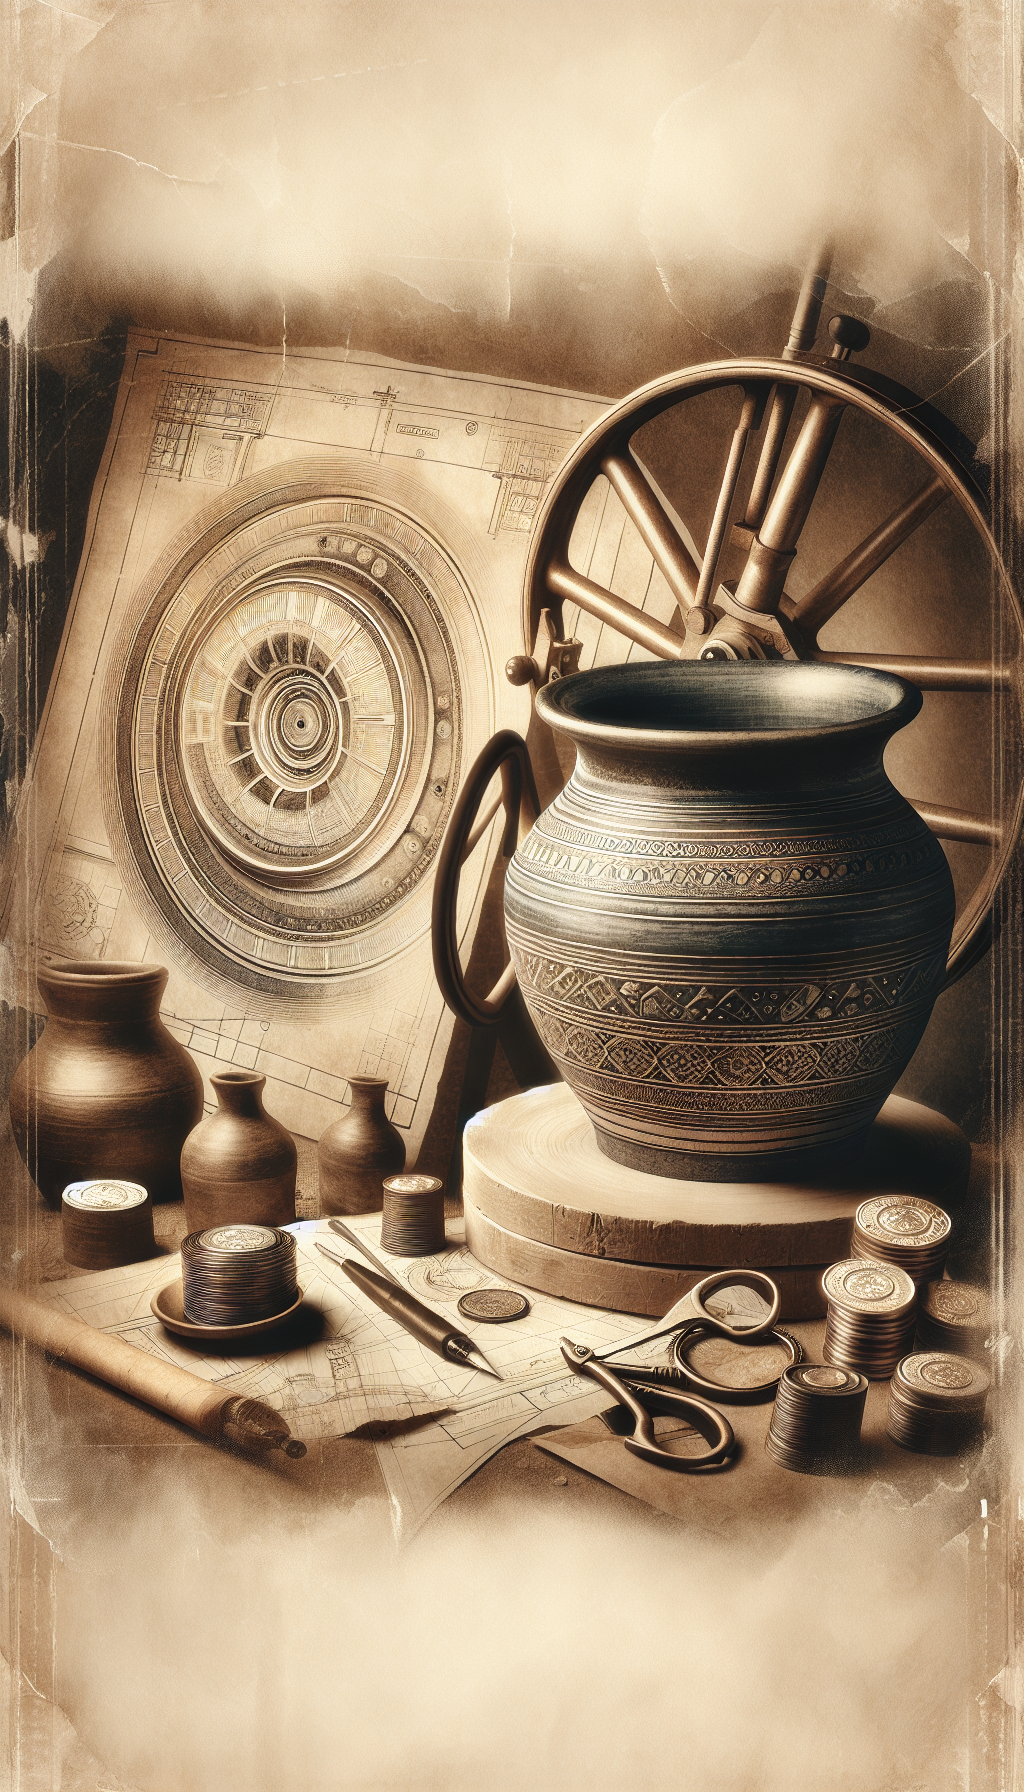 An evocative illustration depicts an aged, timeworn potter's wheel with a gleaming, intricately designed 20-gallon crock resting atop it, surrounded by antique pottery tools and faded blueprints. A soft vignette filters the edges into sepia, suggesting historical depth, while shimmering coins and appraiser's eyepiece cast atop the blueprints subtly hint at the crock's significant value.